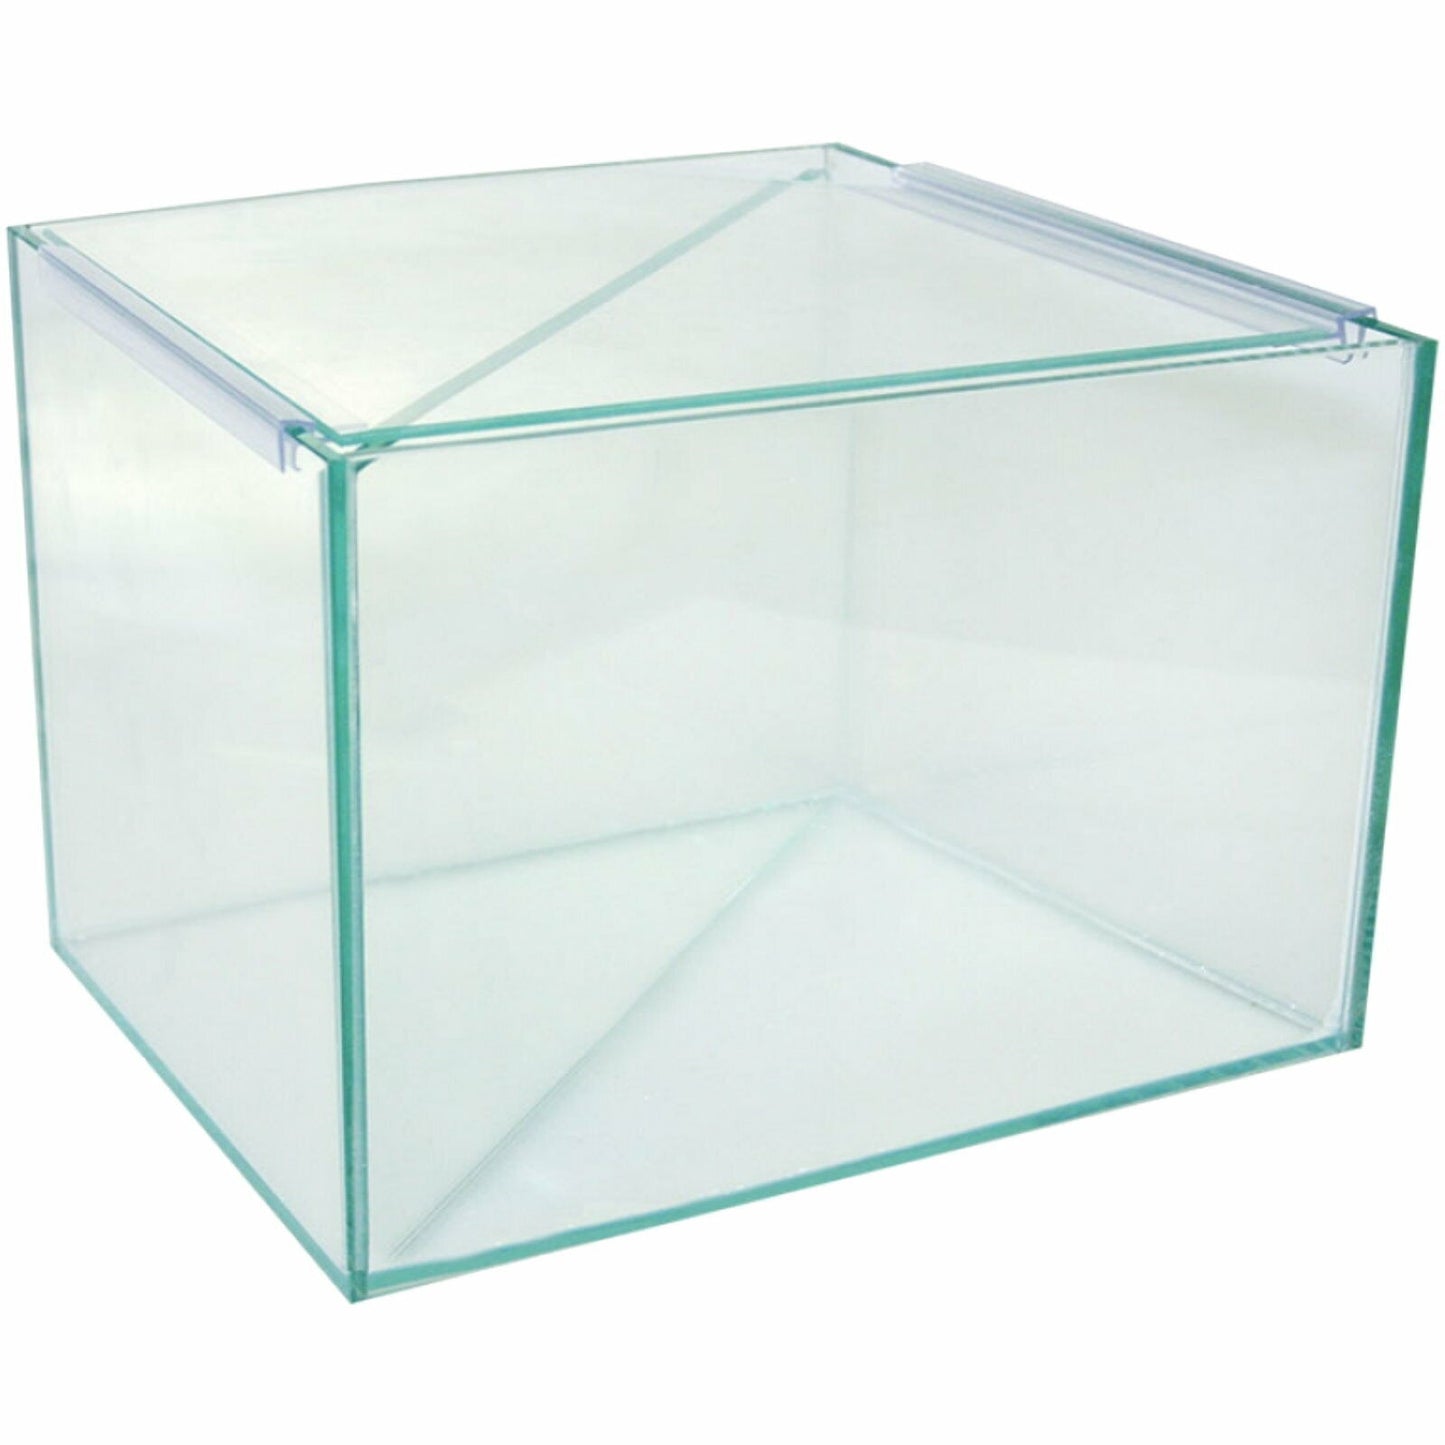 AQUA ONE BETTA DIVIDED GLASS TANK 25x20x20CM (LOCAL DELIVERY AND CLICK AND COLLECT ONLY)